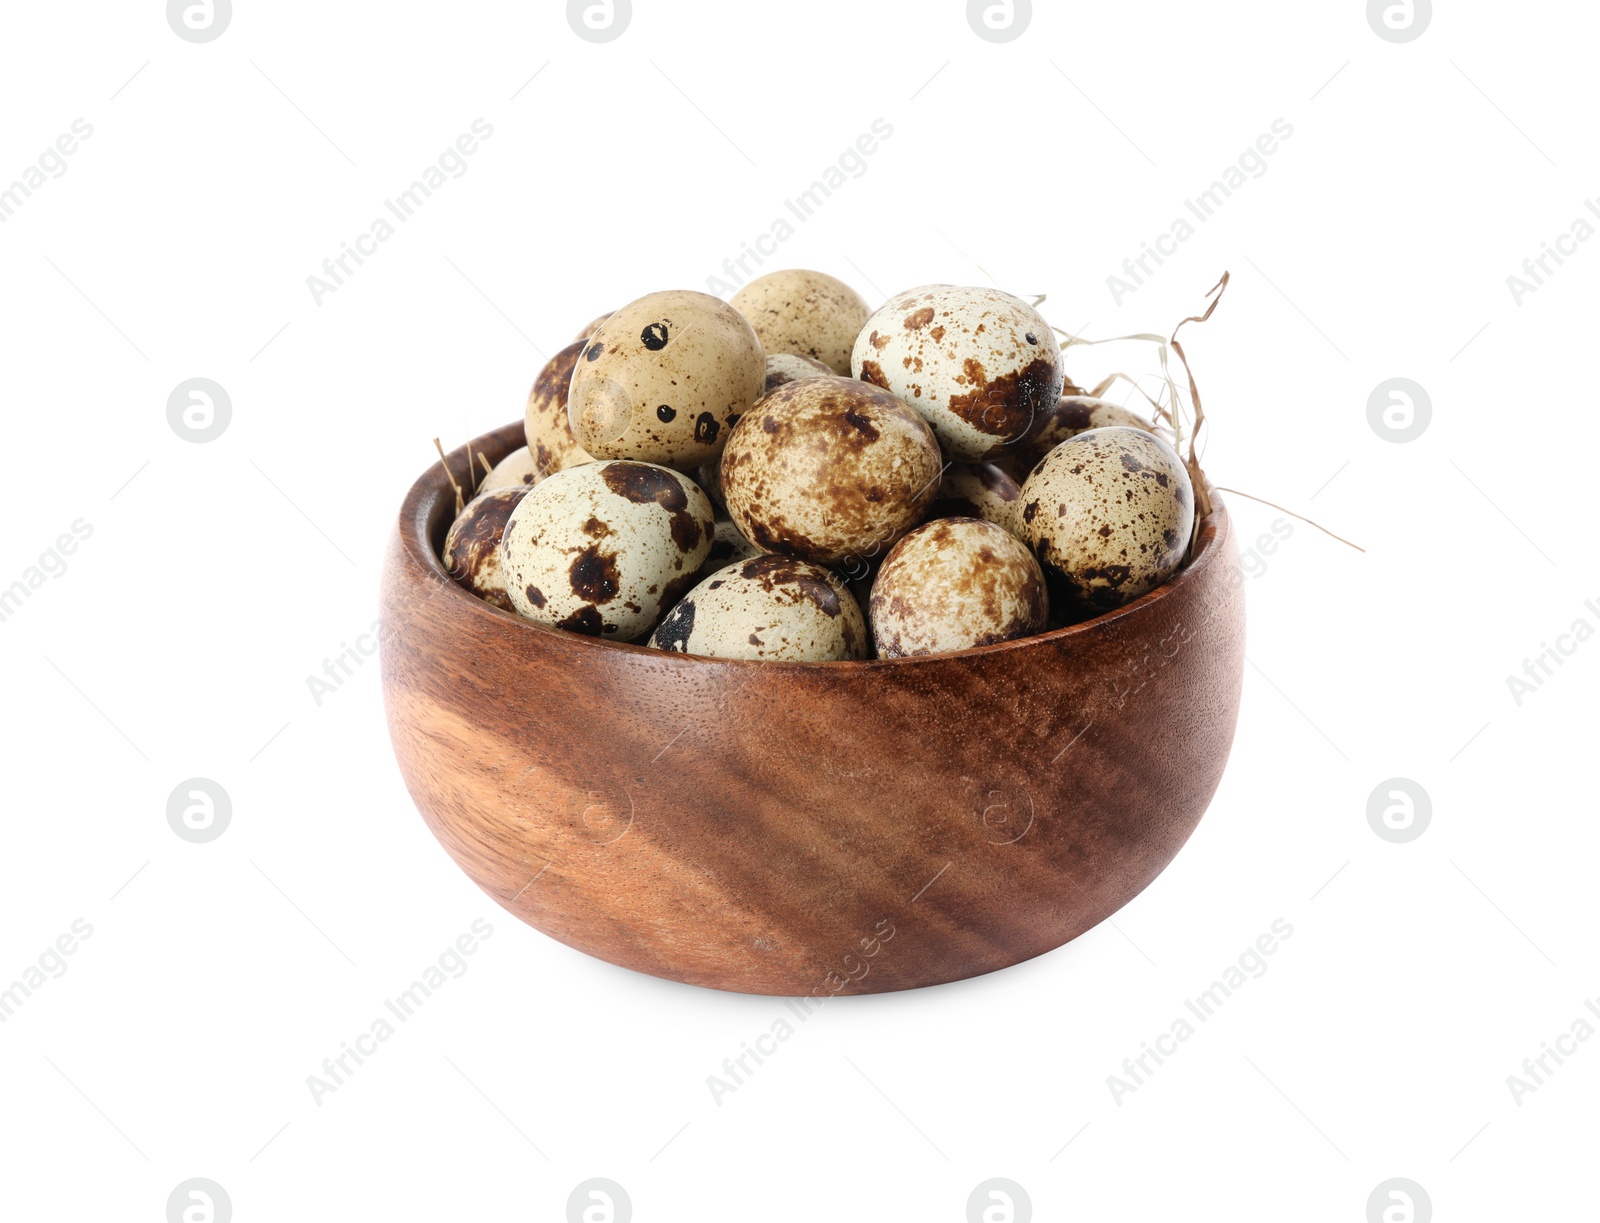 Photo of Wooden bowl with quail eggs and straw isolated on white